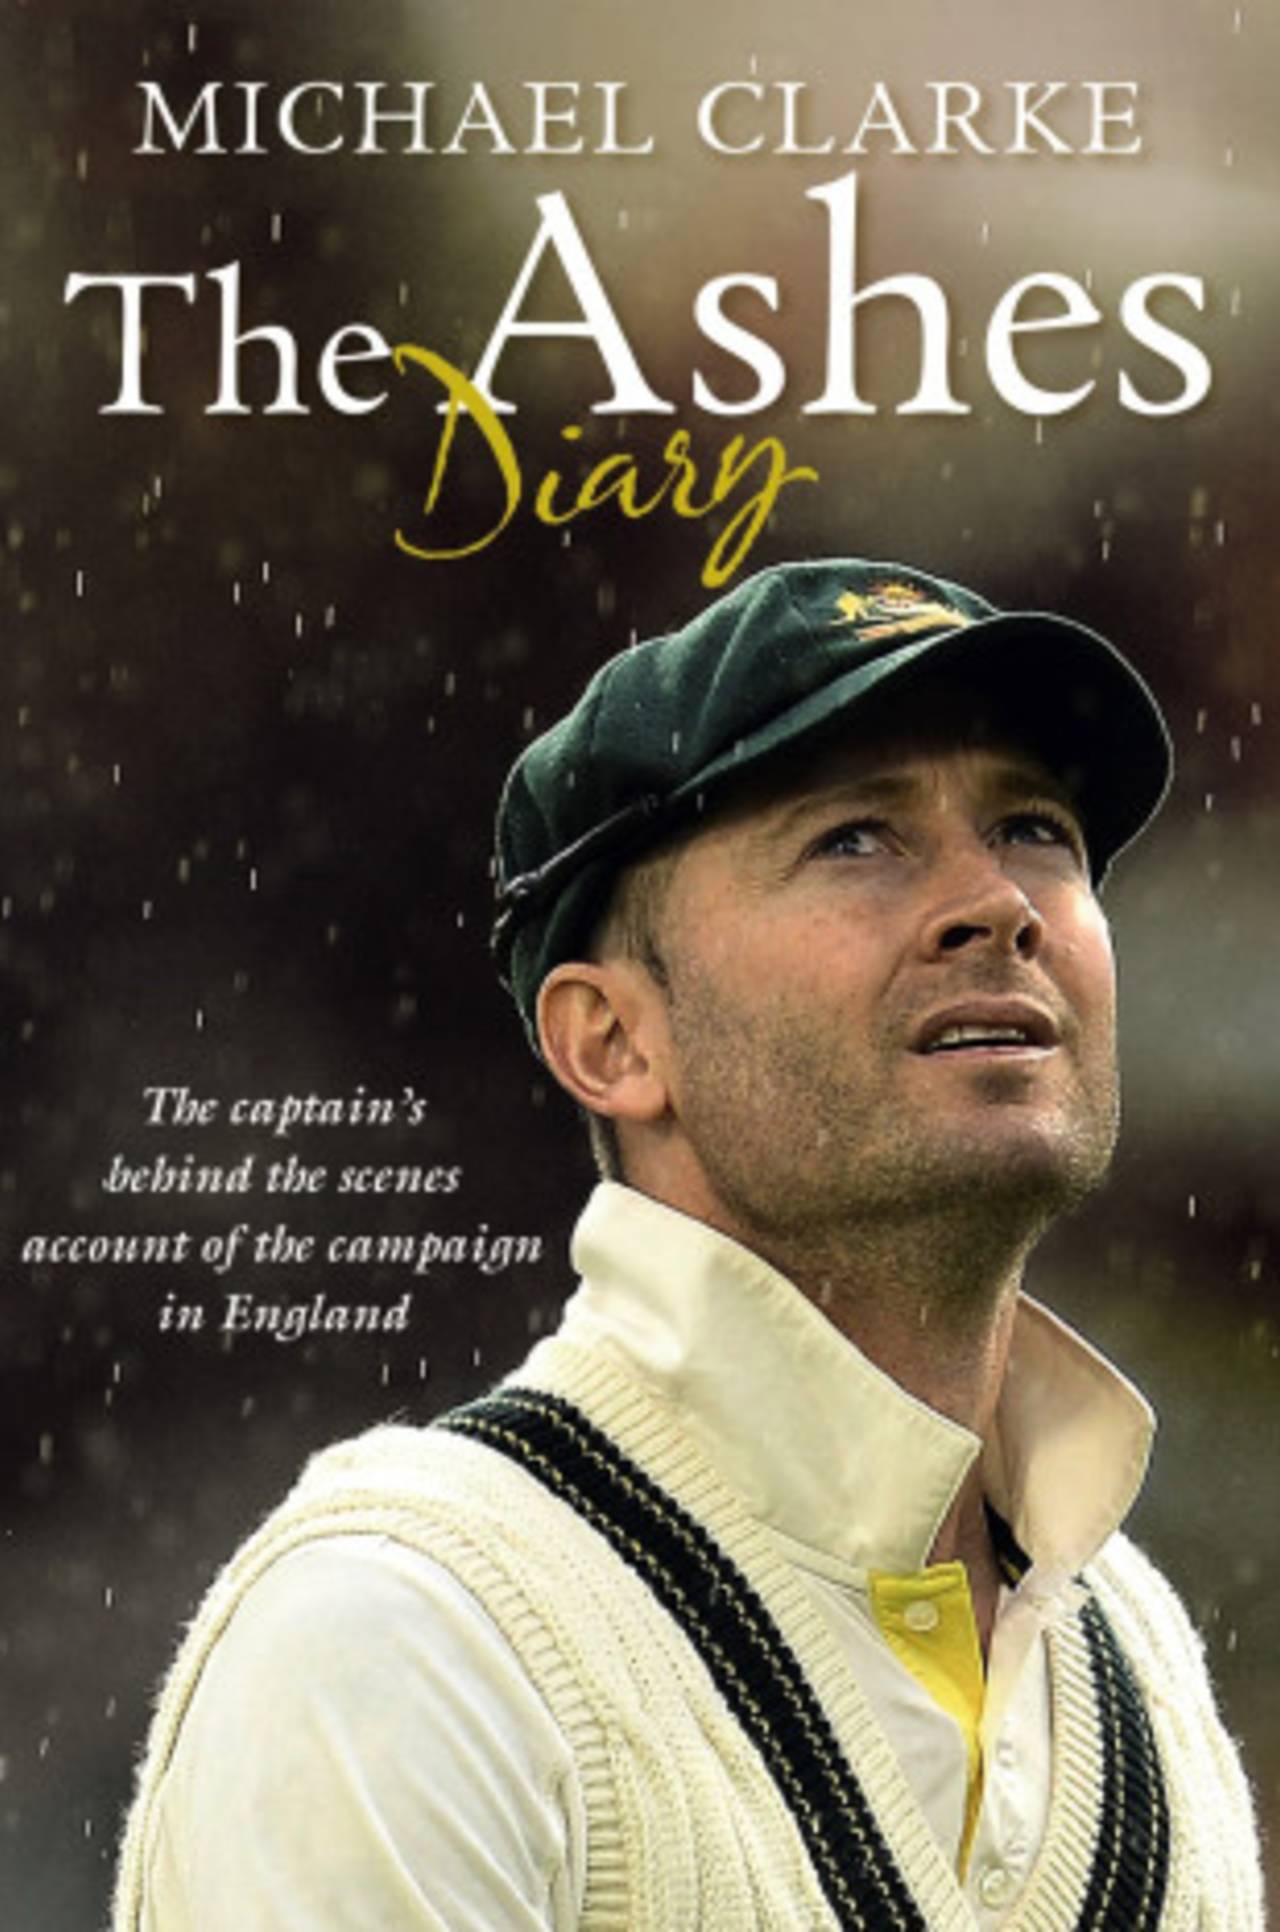 Cover of <i>The Ashes Diary</i> by Michael Clarke, 2013